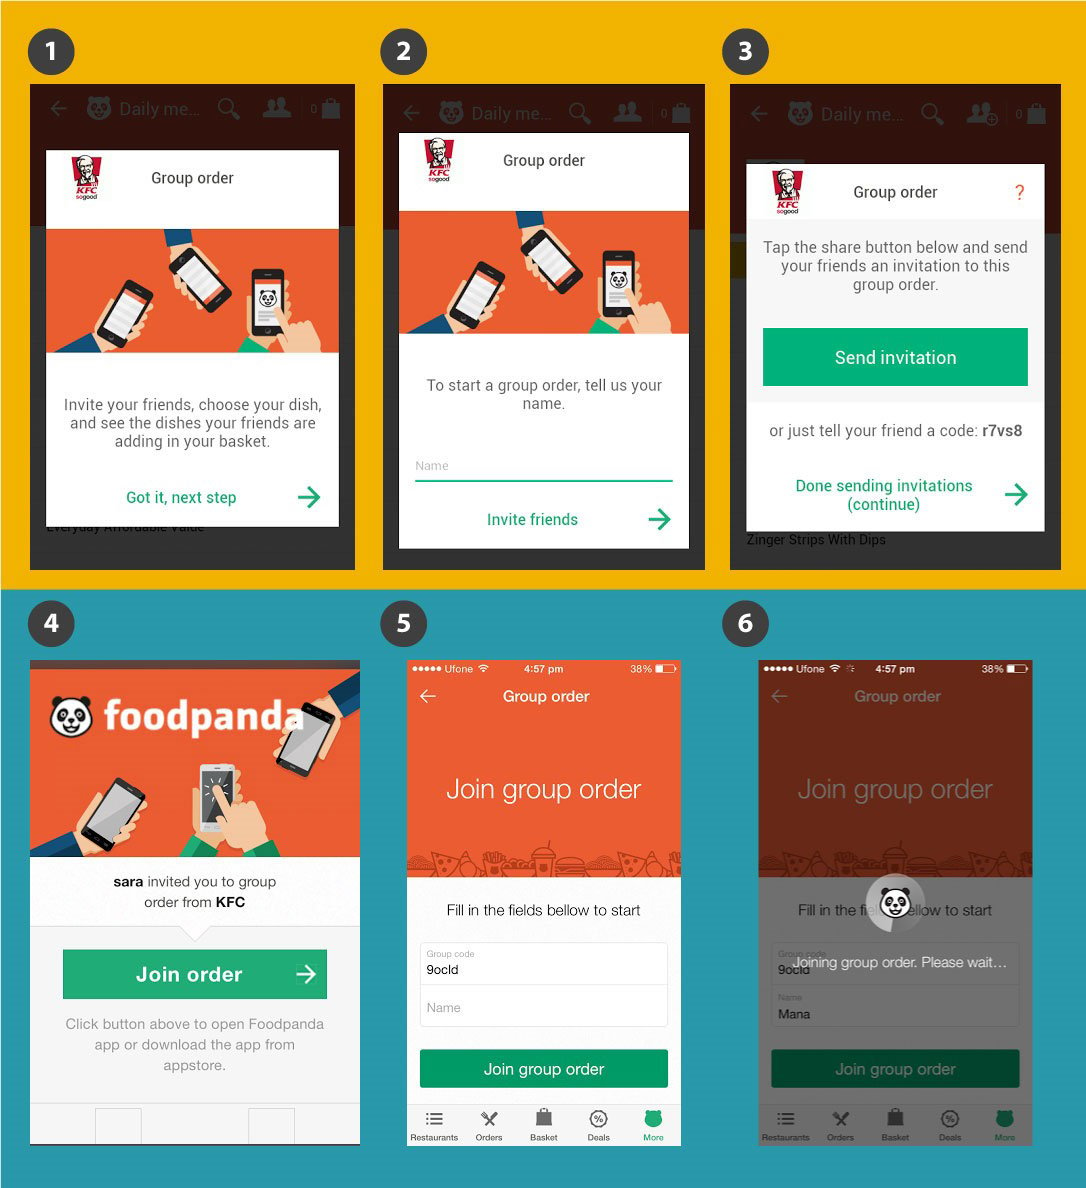 Foodpanda Introduces Group Order Feature in Mobile App for iOS, Android and Windows Phone Devices